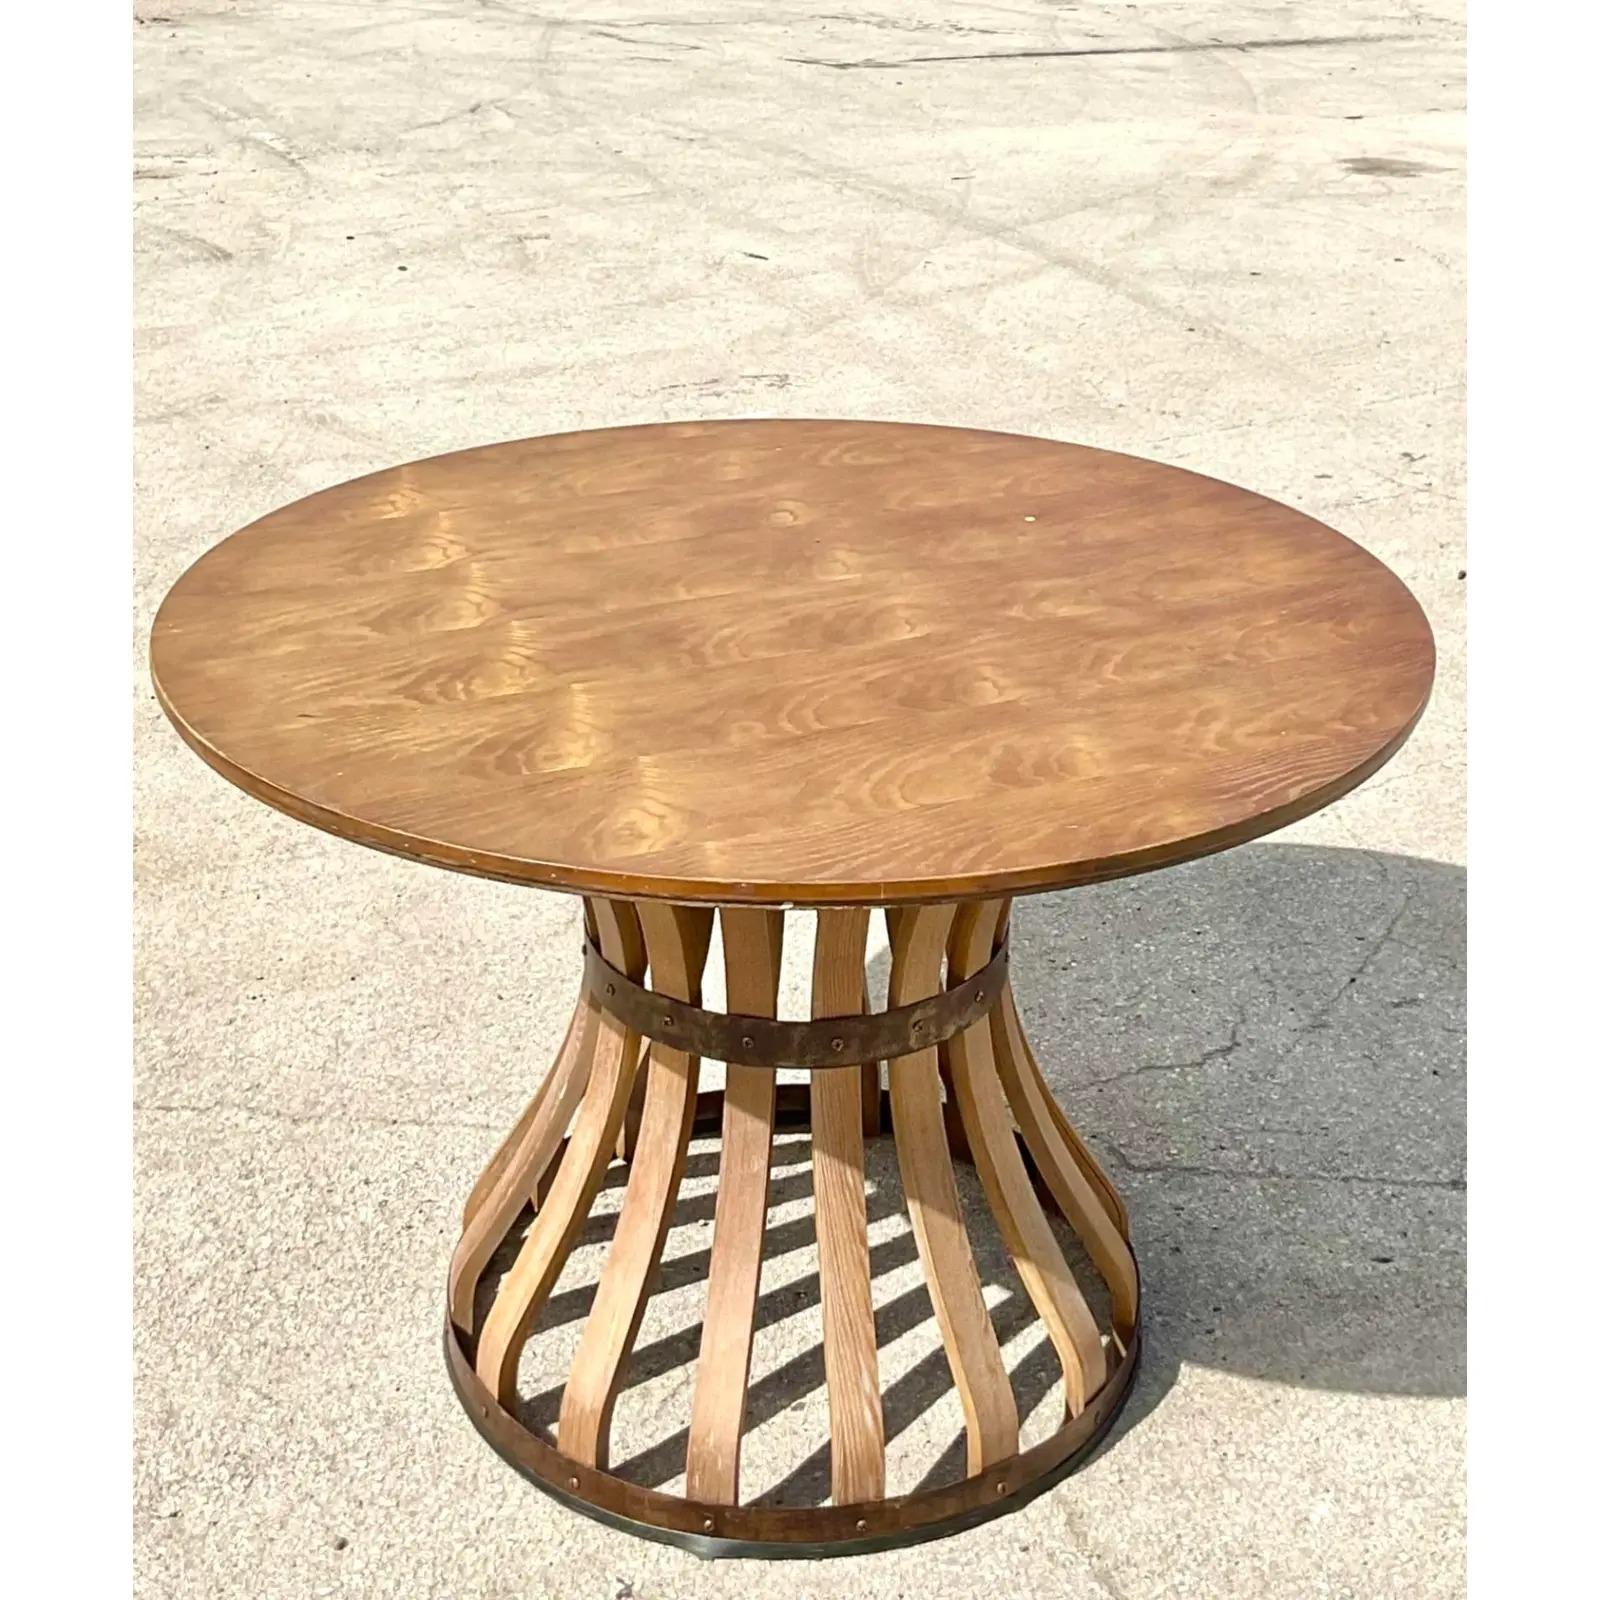 Fantastic vintage Boho dining table. Beautiful bent wood with distressed metal hardware. Great wood grain detail. Perfect as a dining table or a dramatic entry hall piece. You decide! Acquired from a Miami estate.